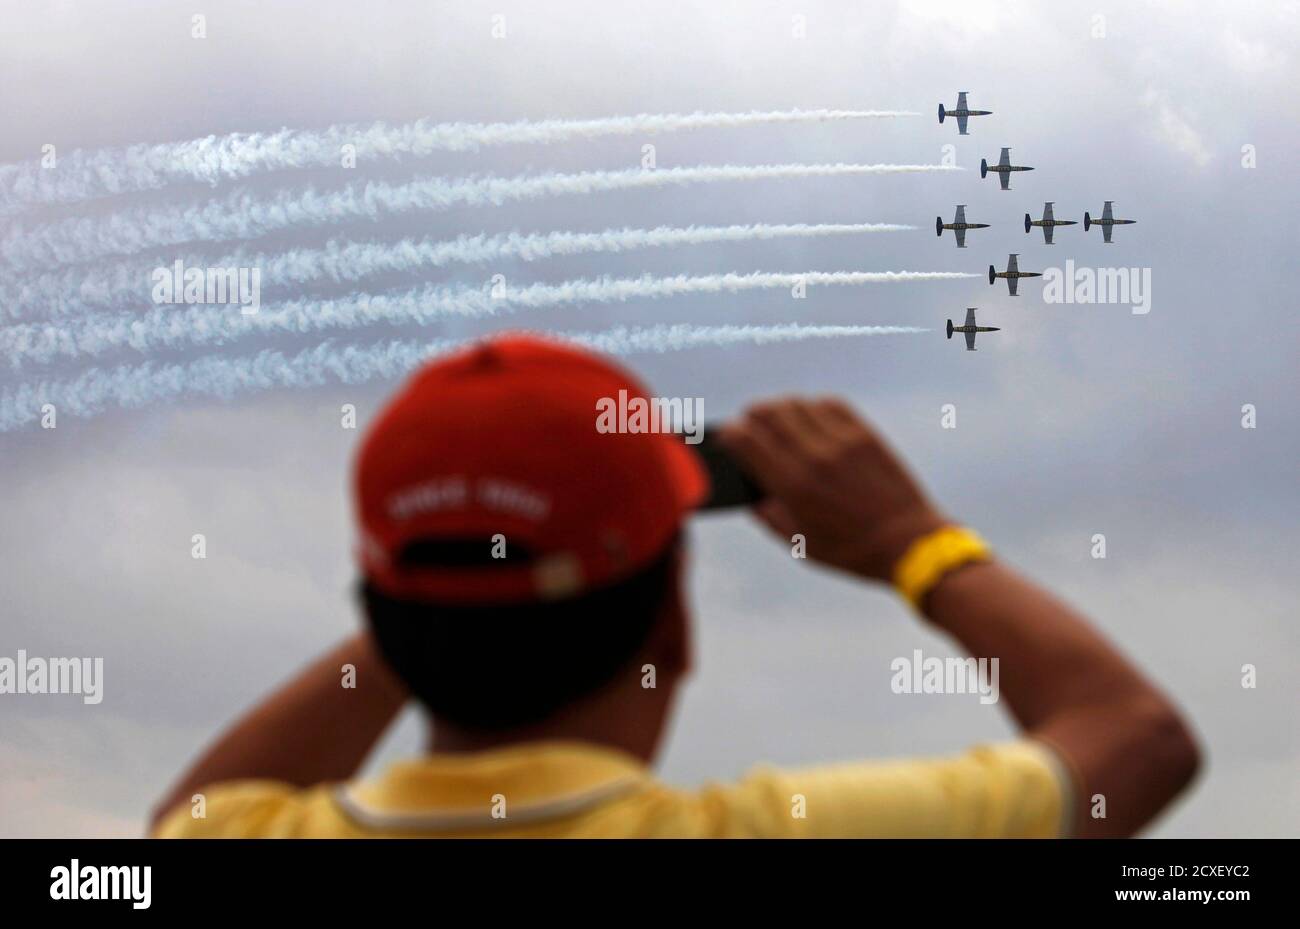 A spectator take pictures of the Breitling Jet Team's Aero L-39 Albatros jets during an aerobatics display over Singapore's Sentosa island March 9, 2013. The jet team is performing this weekend as part of their first Southeast Asia Tour. REUTERS/Edgar Su (SINGAPORE - Tags: TRANSPORT SOCIETY) Stock Photo